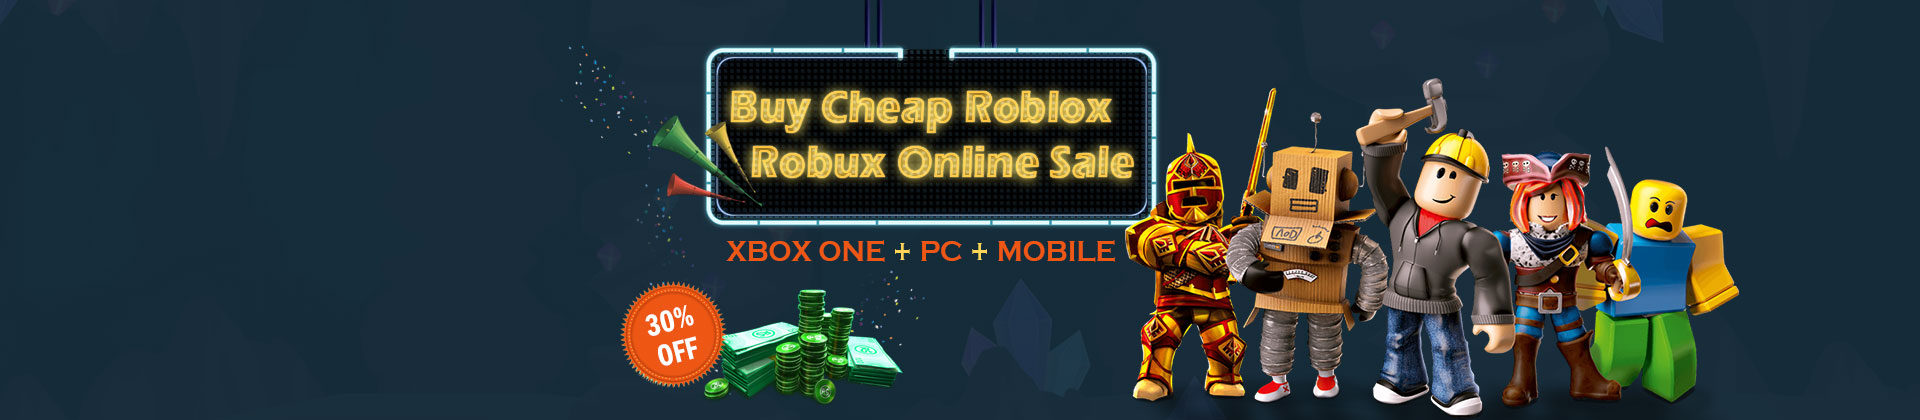 50 Off 5mmo Com Coupon Code Promo Code Jul 2021 - 5mmo robux